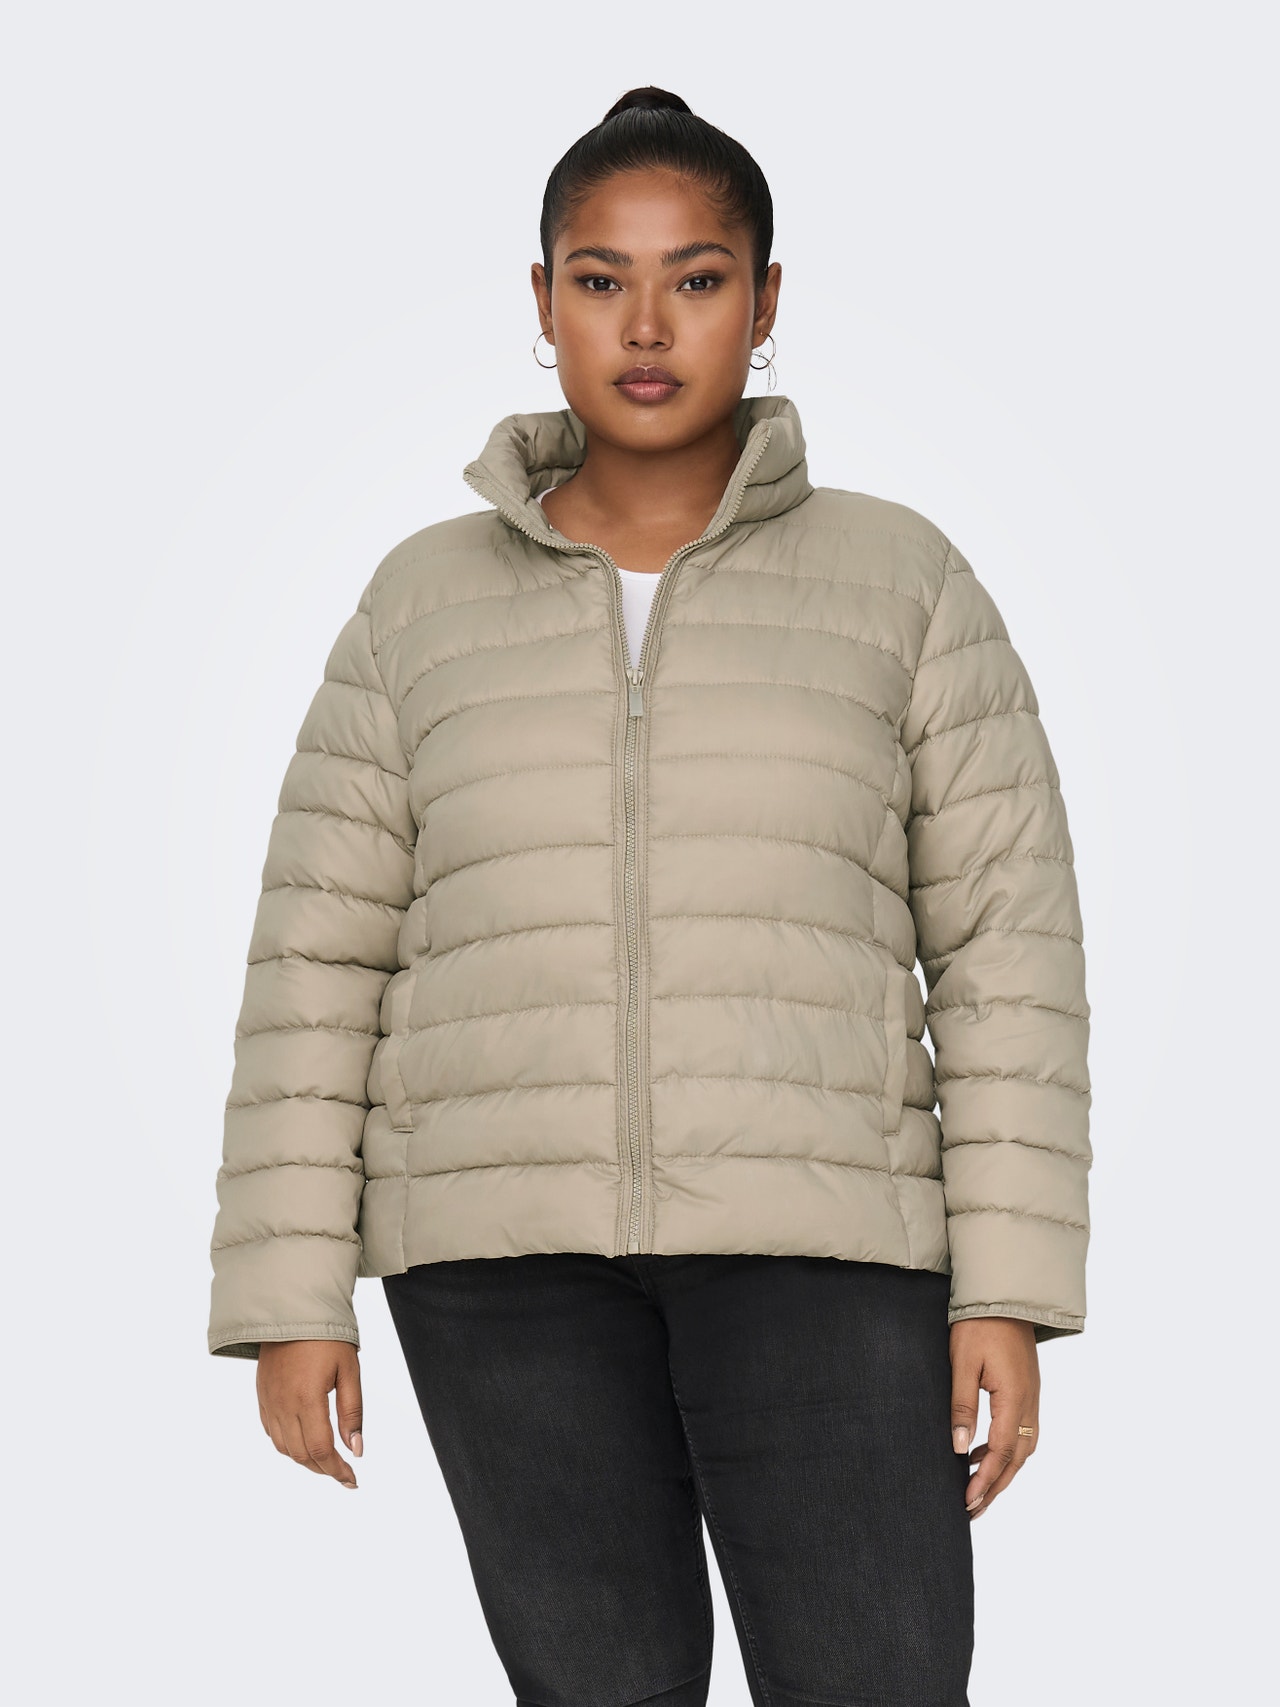 ONLY Curvy short Quilted jacket -Crockery - 15206089